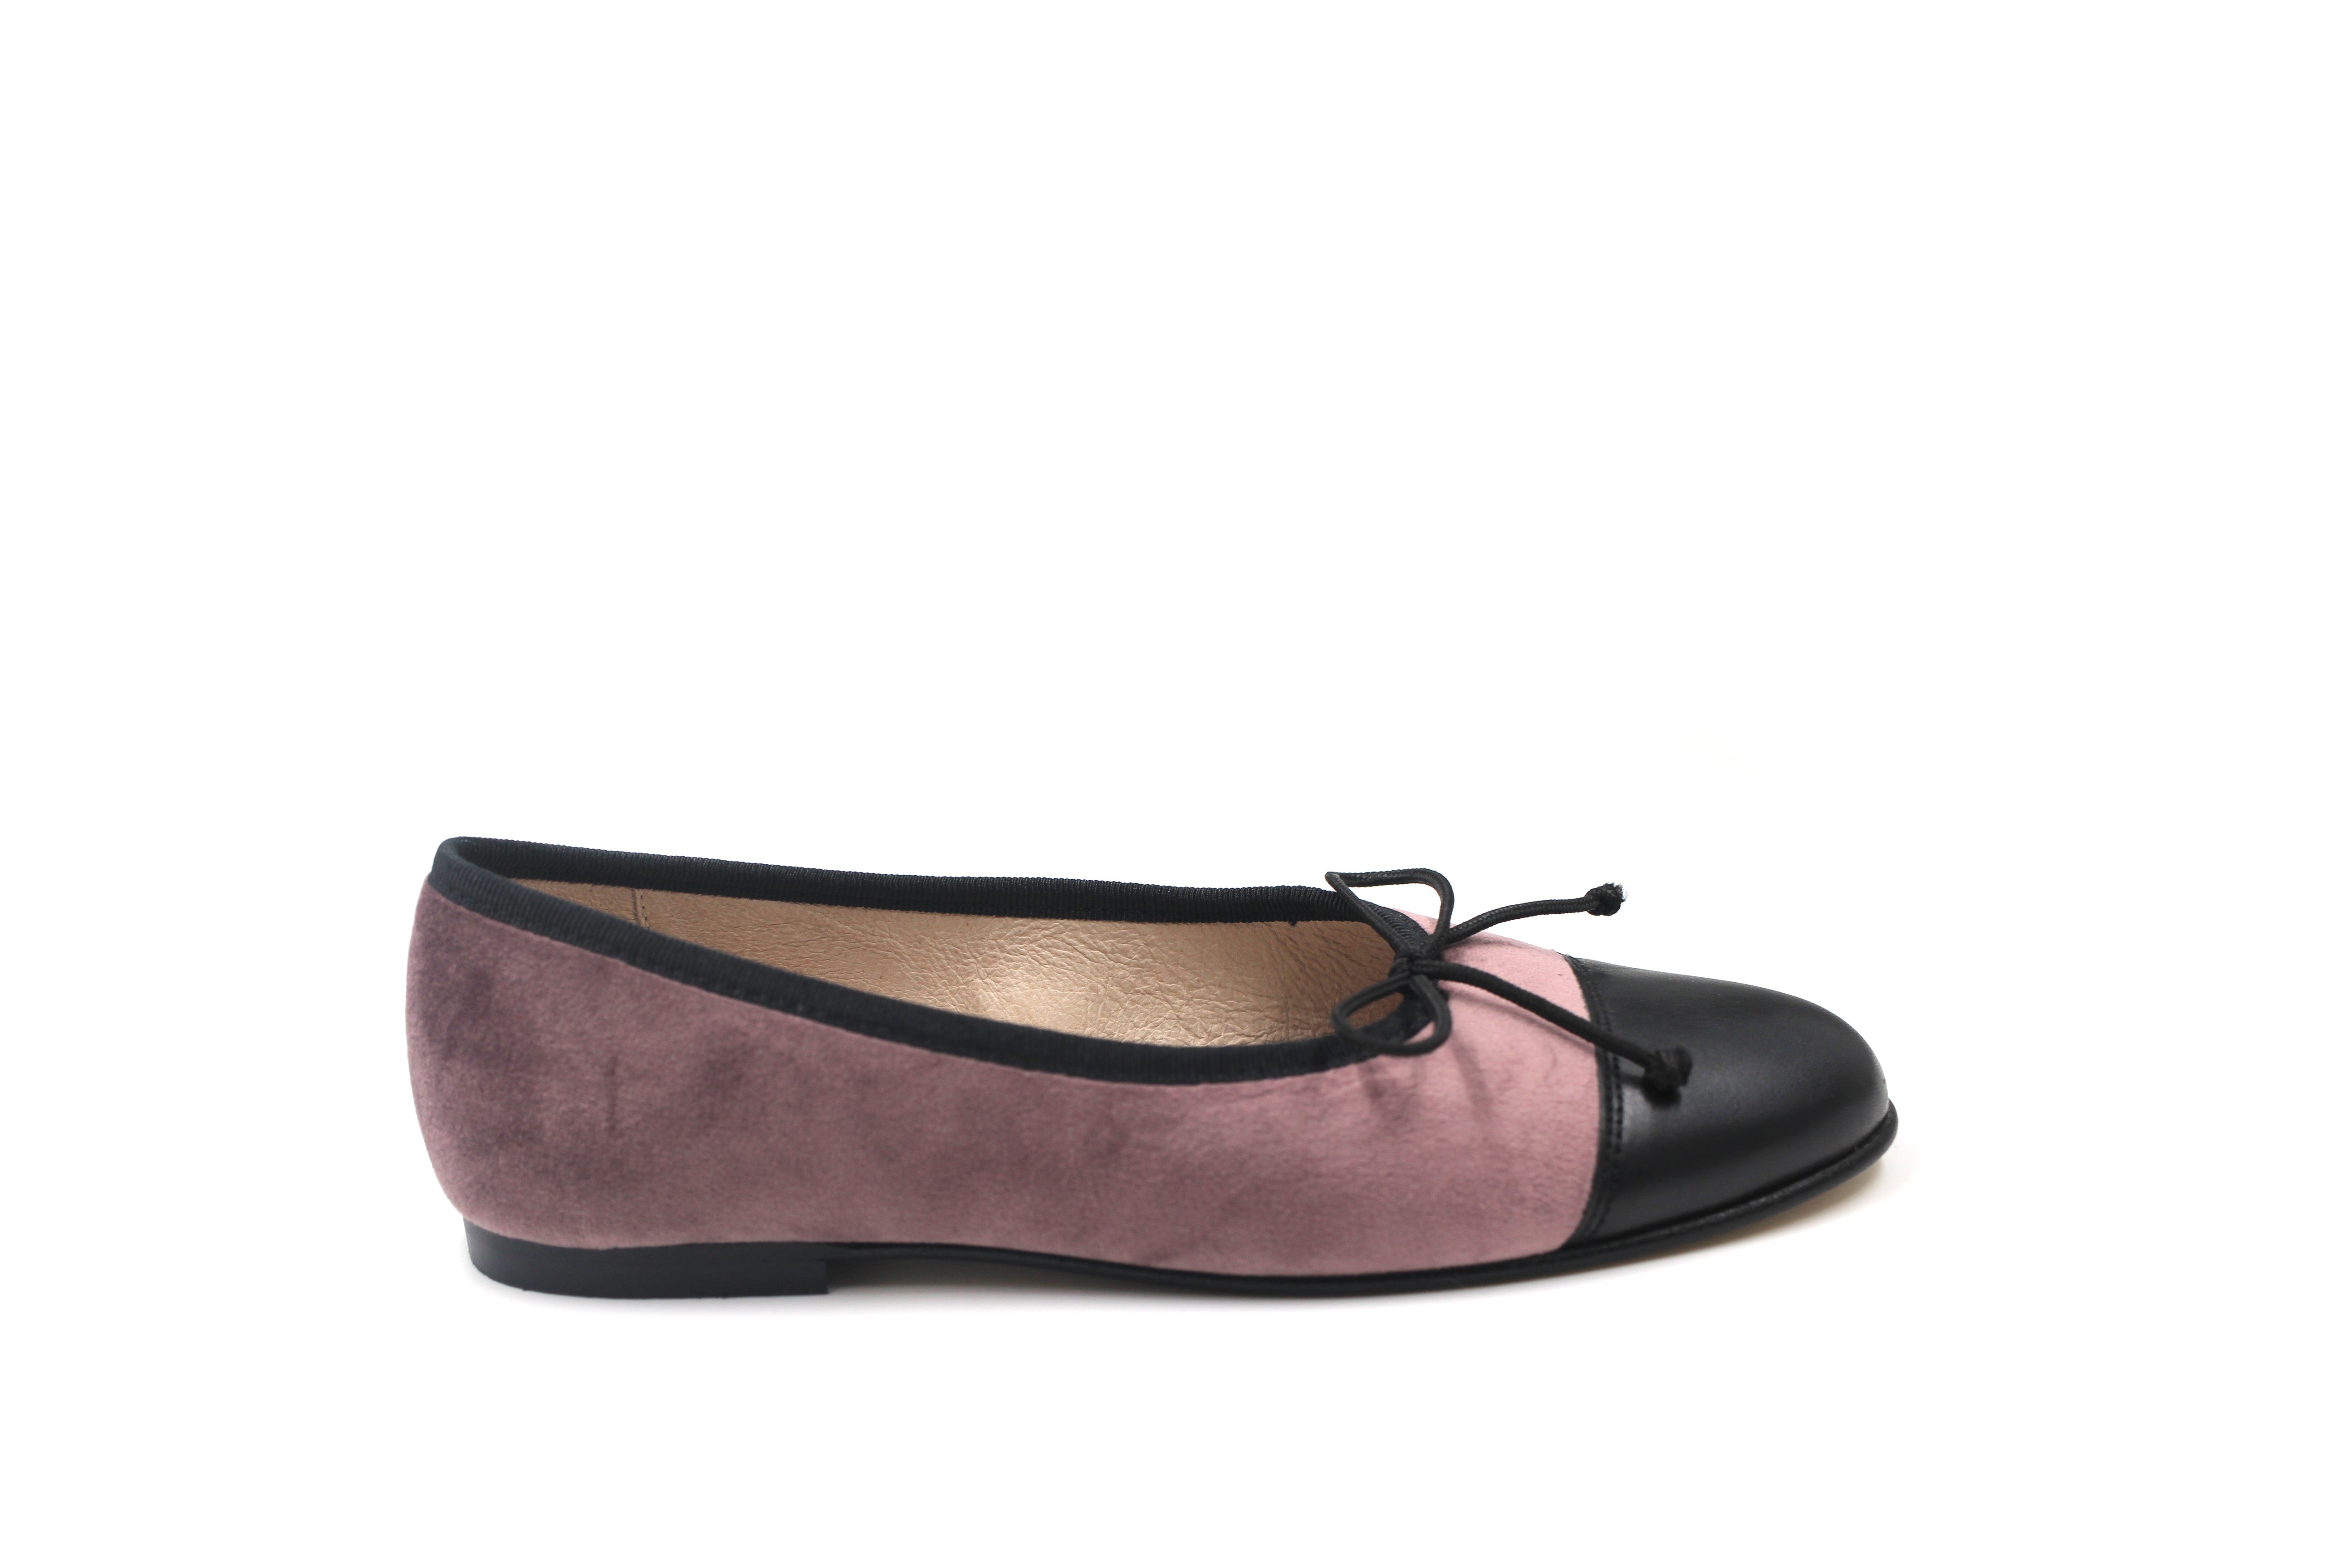 Valencia Lilac Ballet Flat with Leather Cap